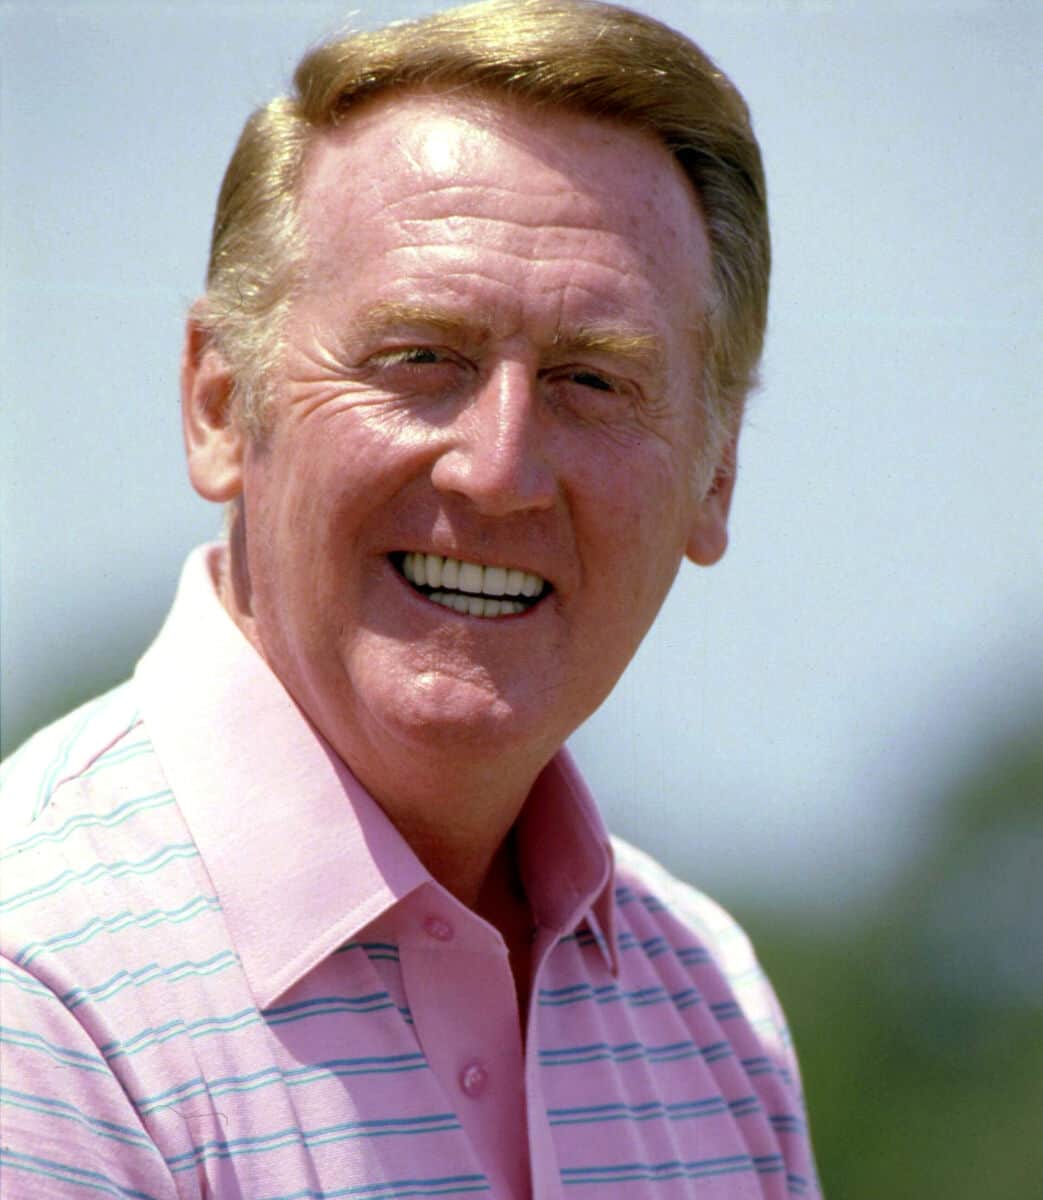 Vin Scully - Famous Announcer